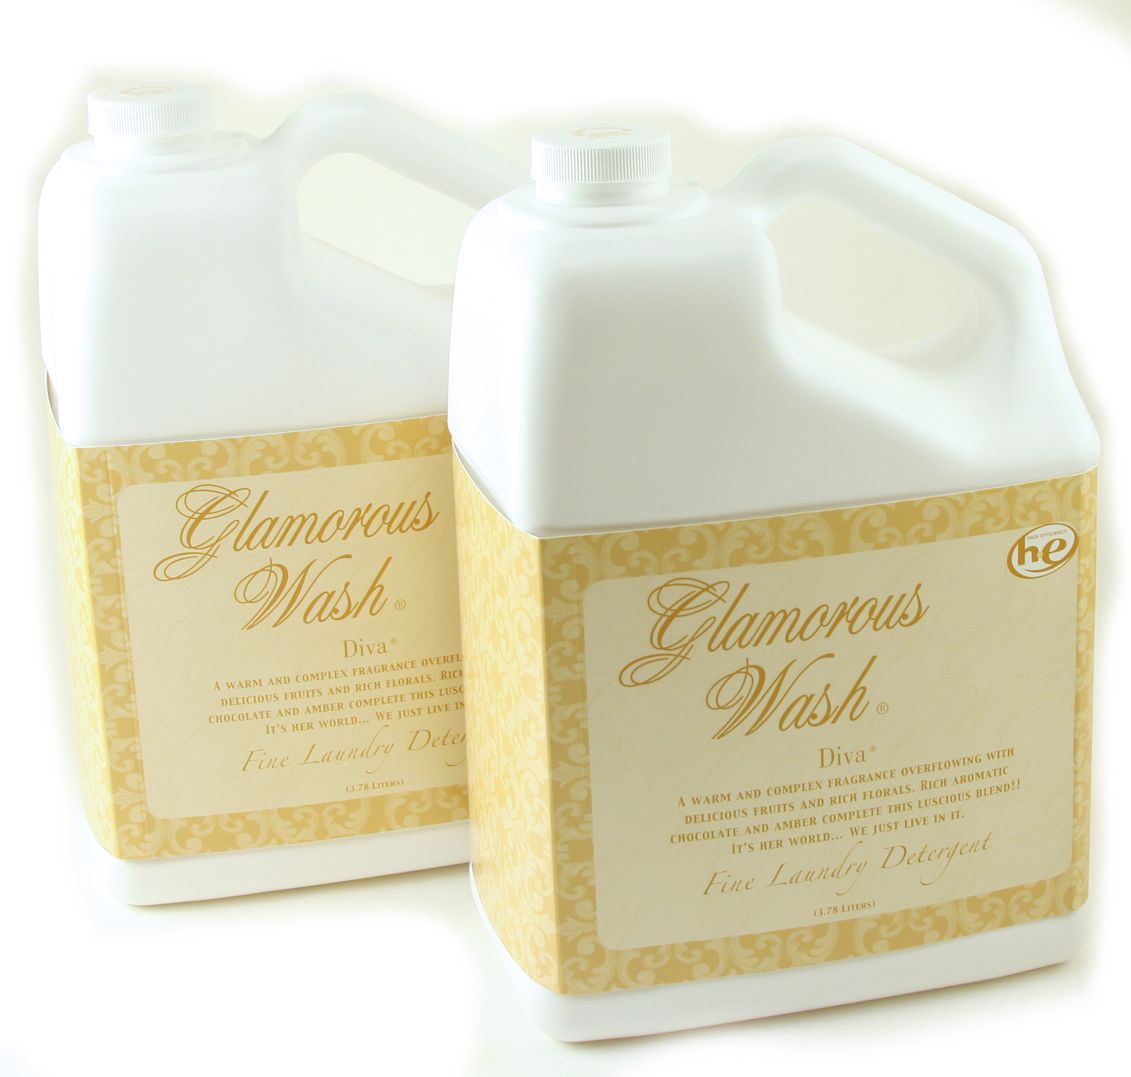 TROPHY TWO GALLON SET Glamorous Wash Laundry Detergent by Tyler Candles